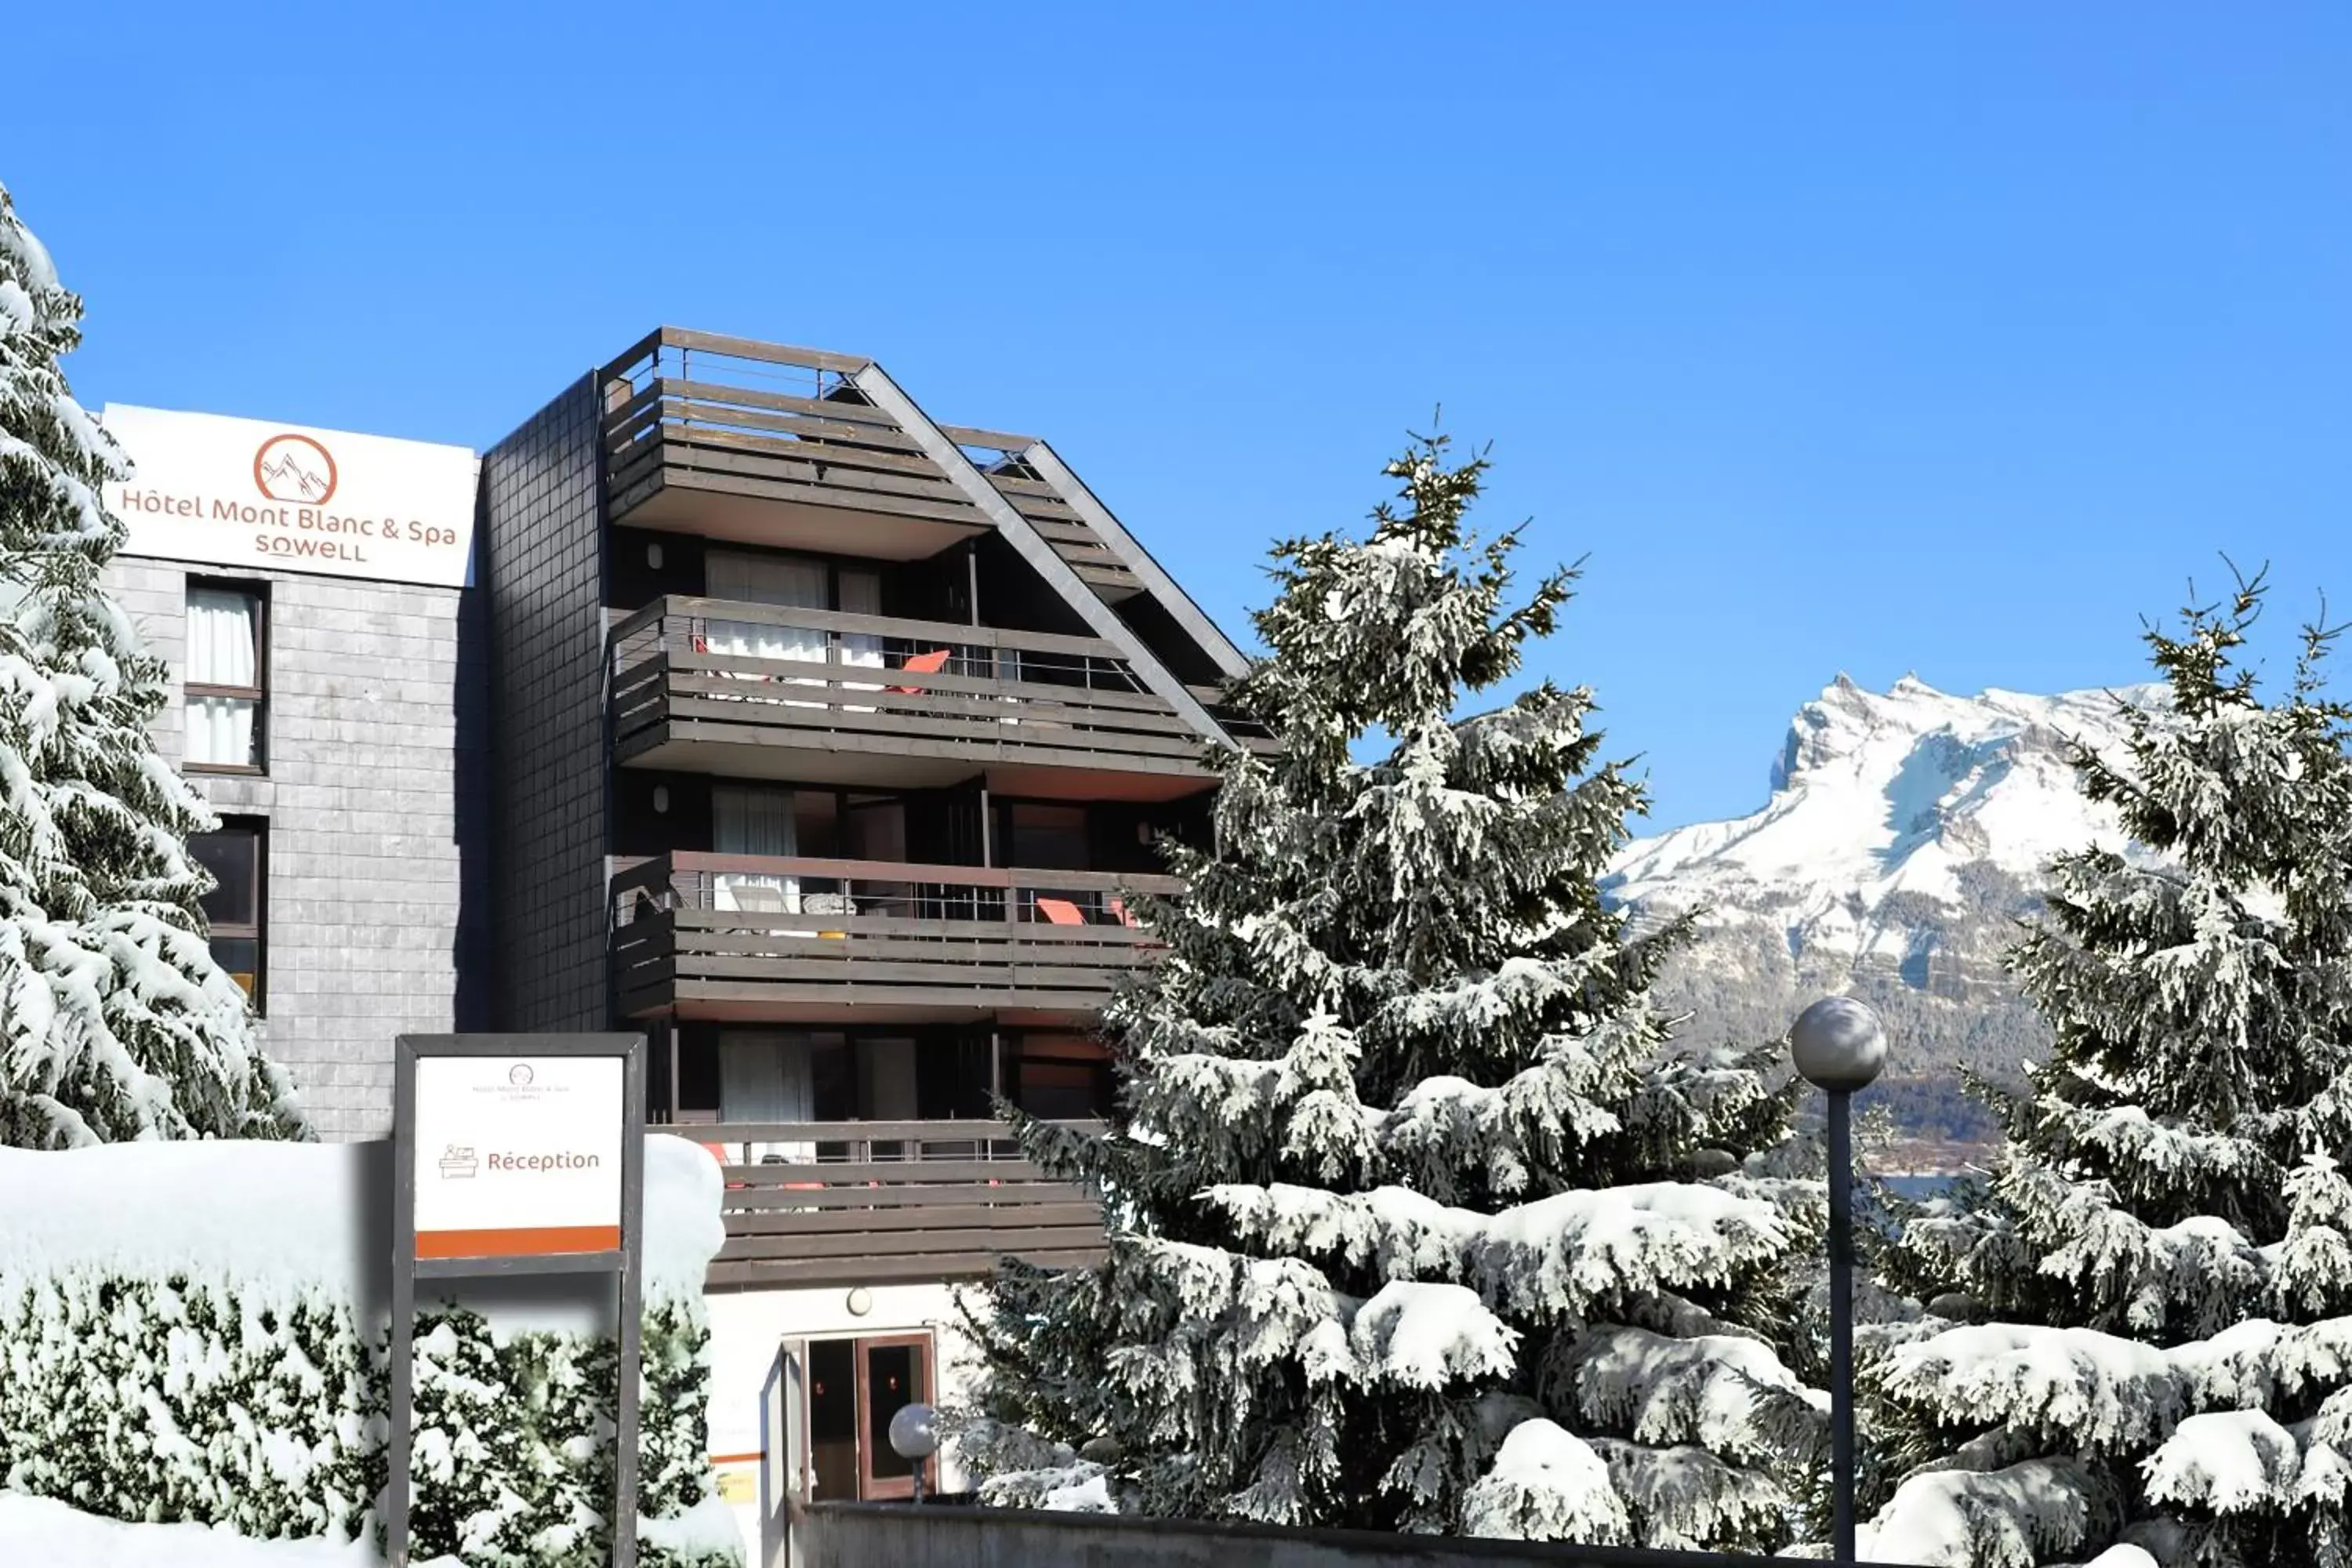 Property building, Winter in SOWELL HOTELS Mont Blanc et SPA